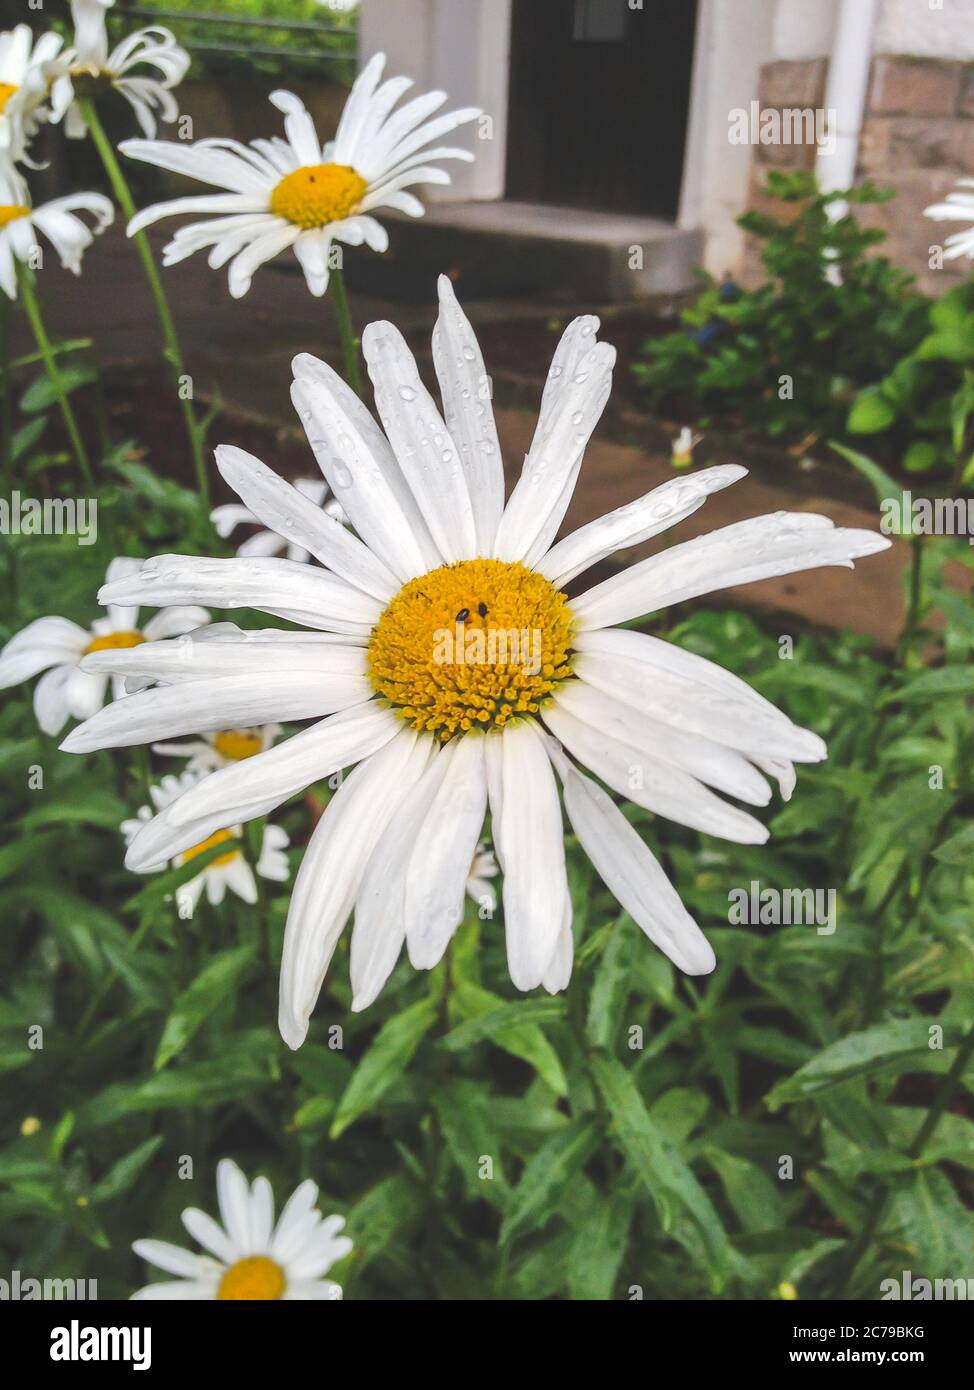 close up on a white daisy flower on a garden bush with some raindrops over the petals Stock Photo